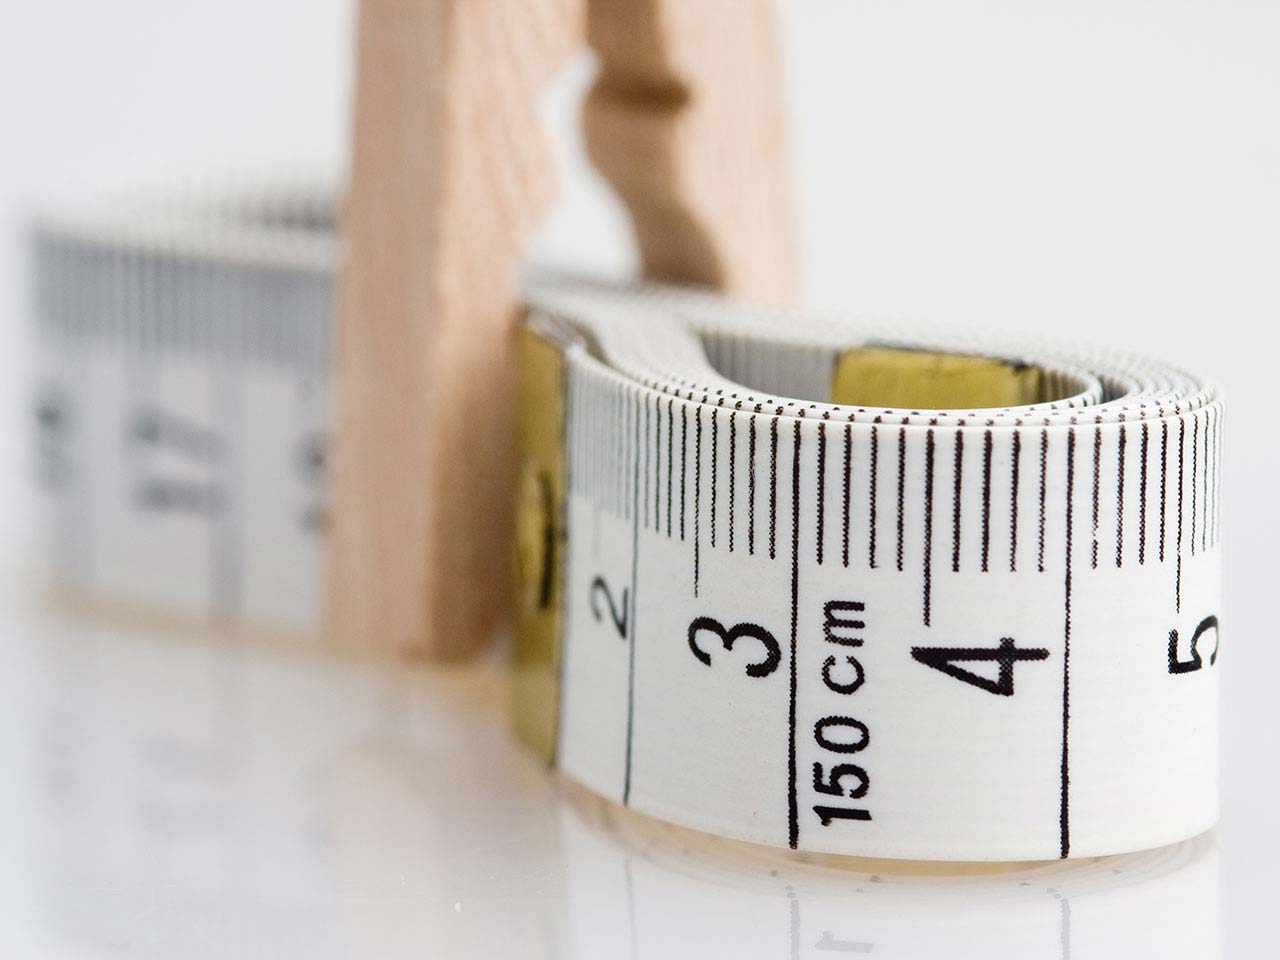 Tape measure pinched by a peg signifying fat and obesity